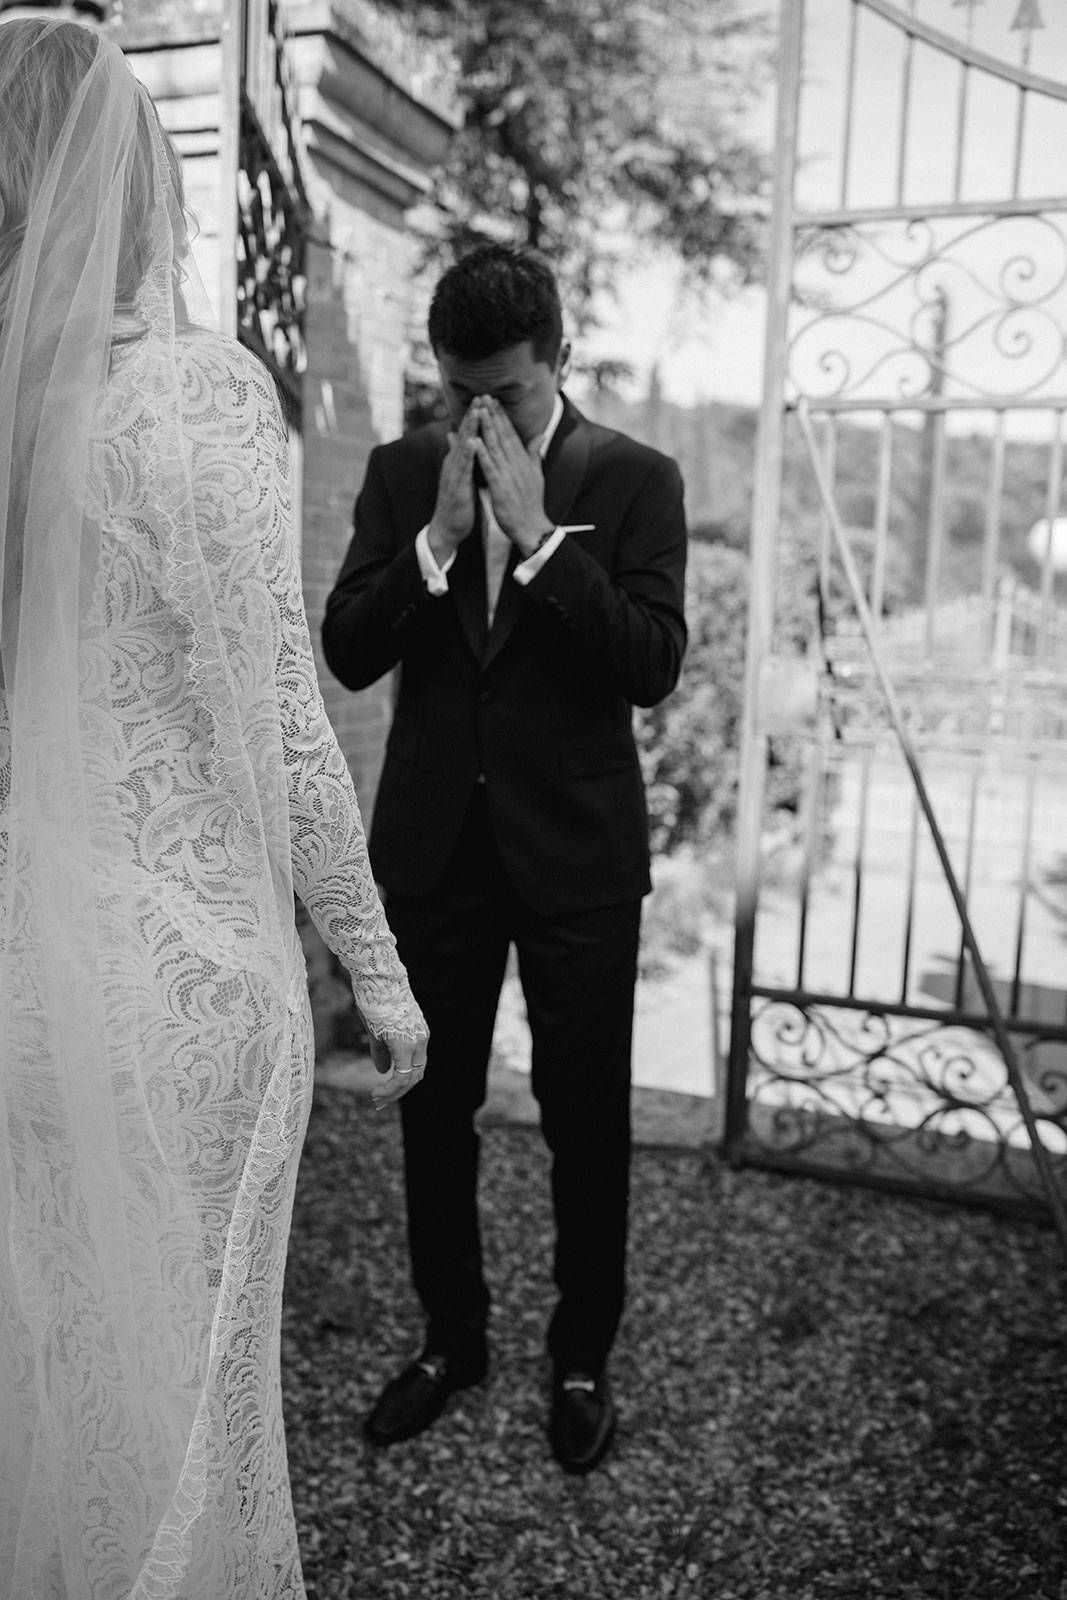 New husband emotional after seeing bride for the first time